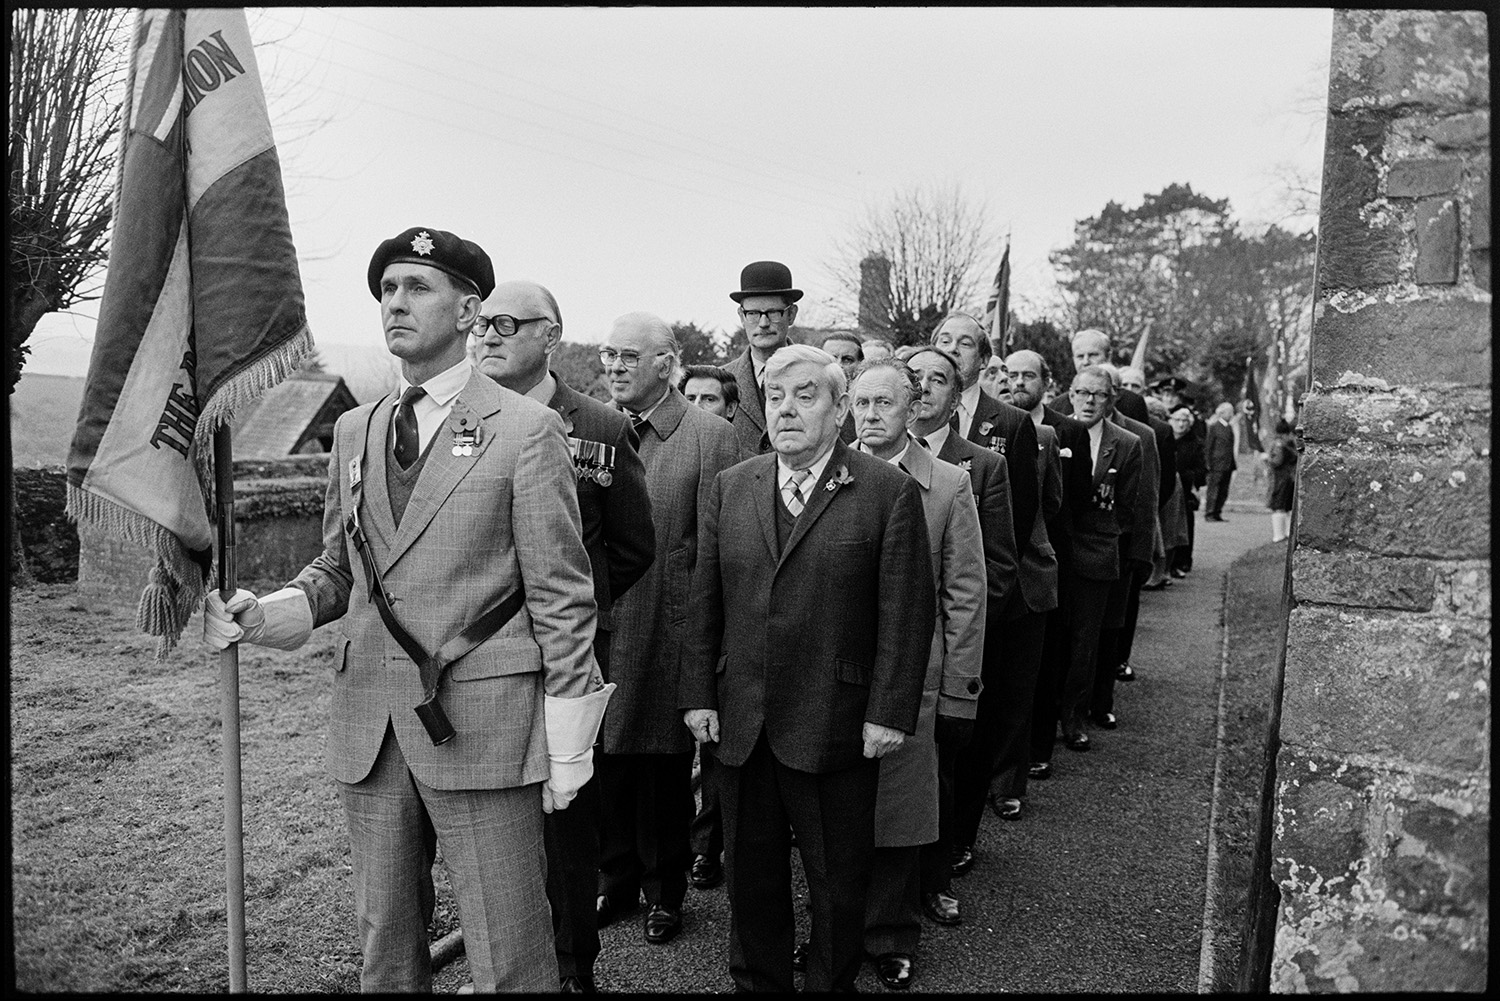 Armistice Day, church, parade line up, chat afterwards with officers in bowler hats, medals. 
[Men, possibly ex-servicemen, lined up outside Chulmleigh Church for a Remembrance Day parade. One man is wearing a bowler hat. Some of them are wearing medals. The man leading the parade is carrying a British Legion flag.]